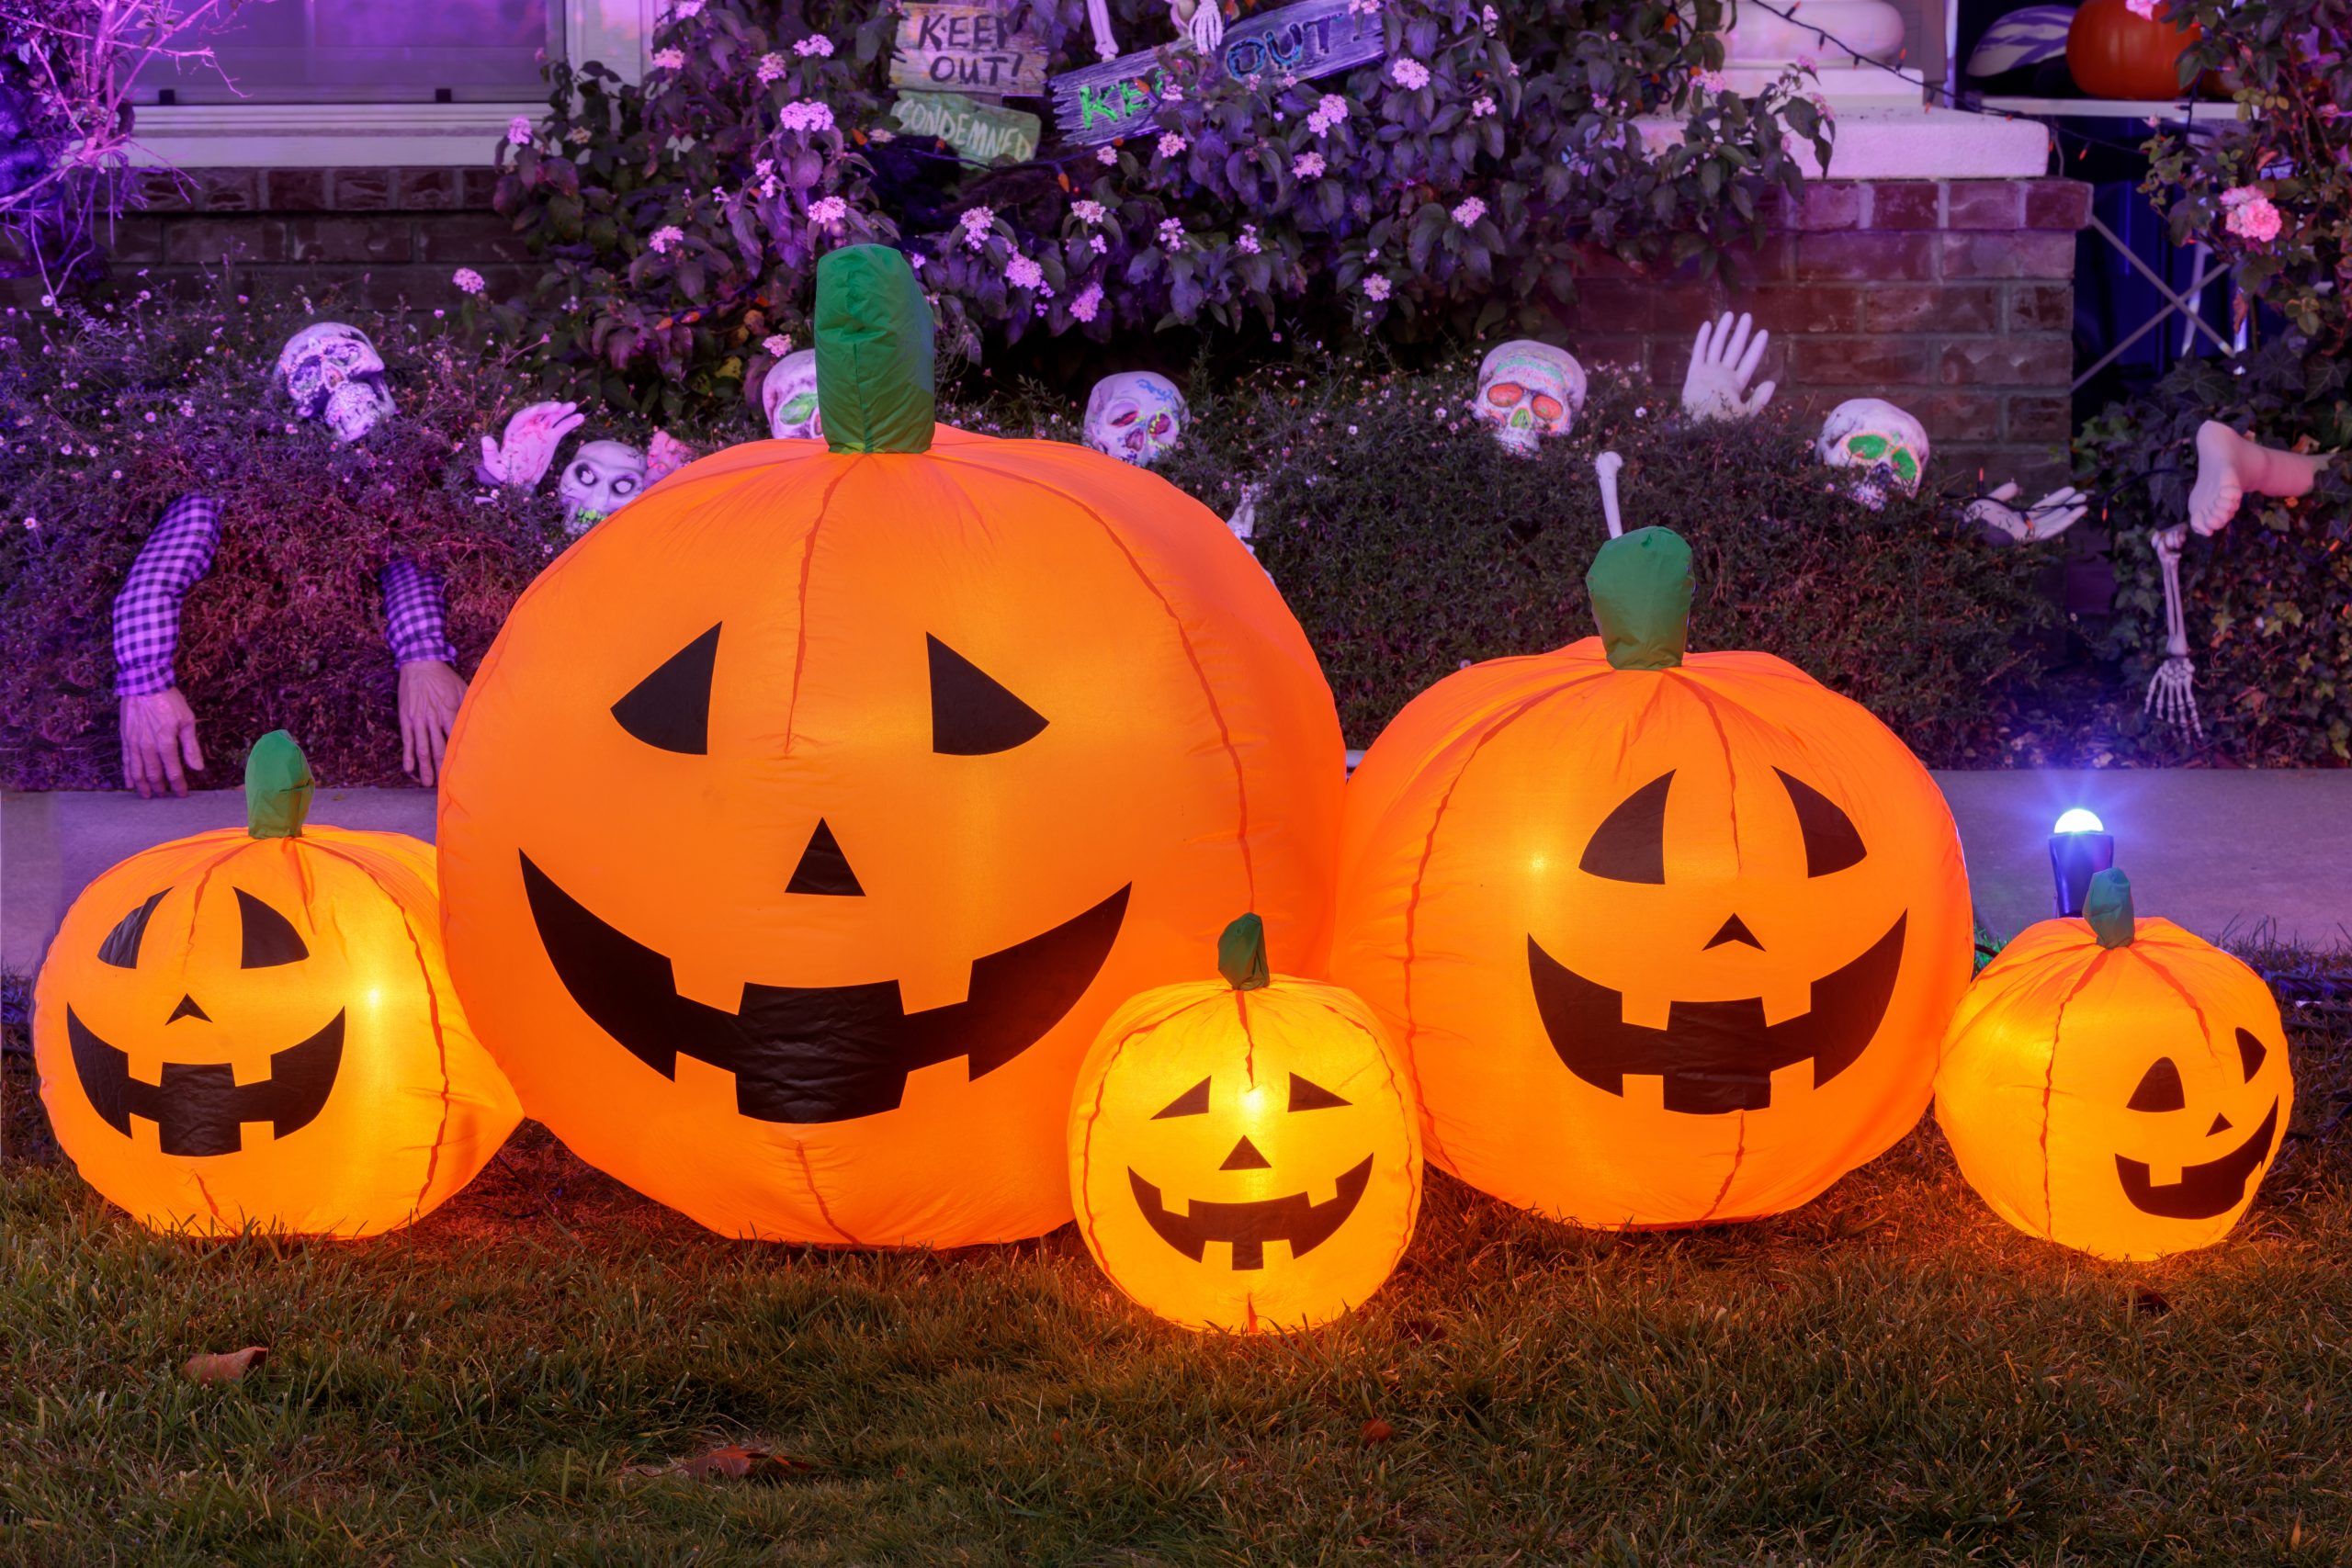 Inflatable pumpkins glowing. Halloween background decoration out